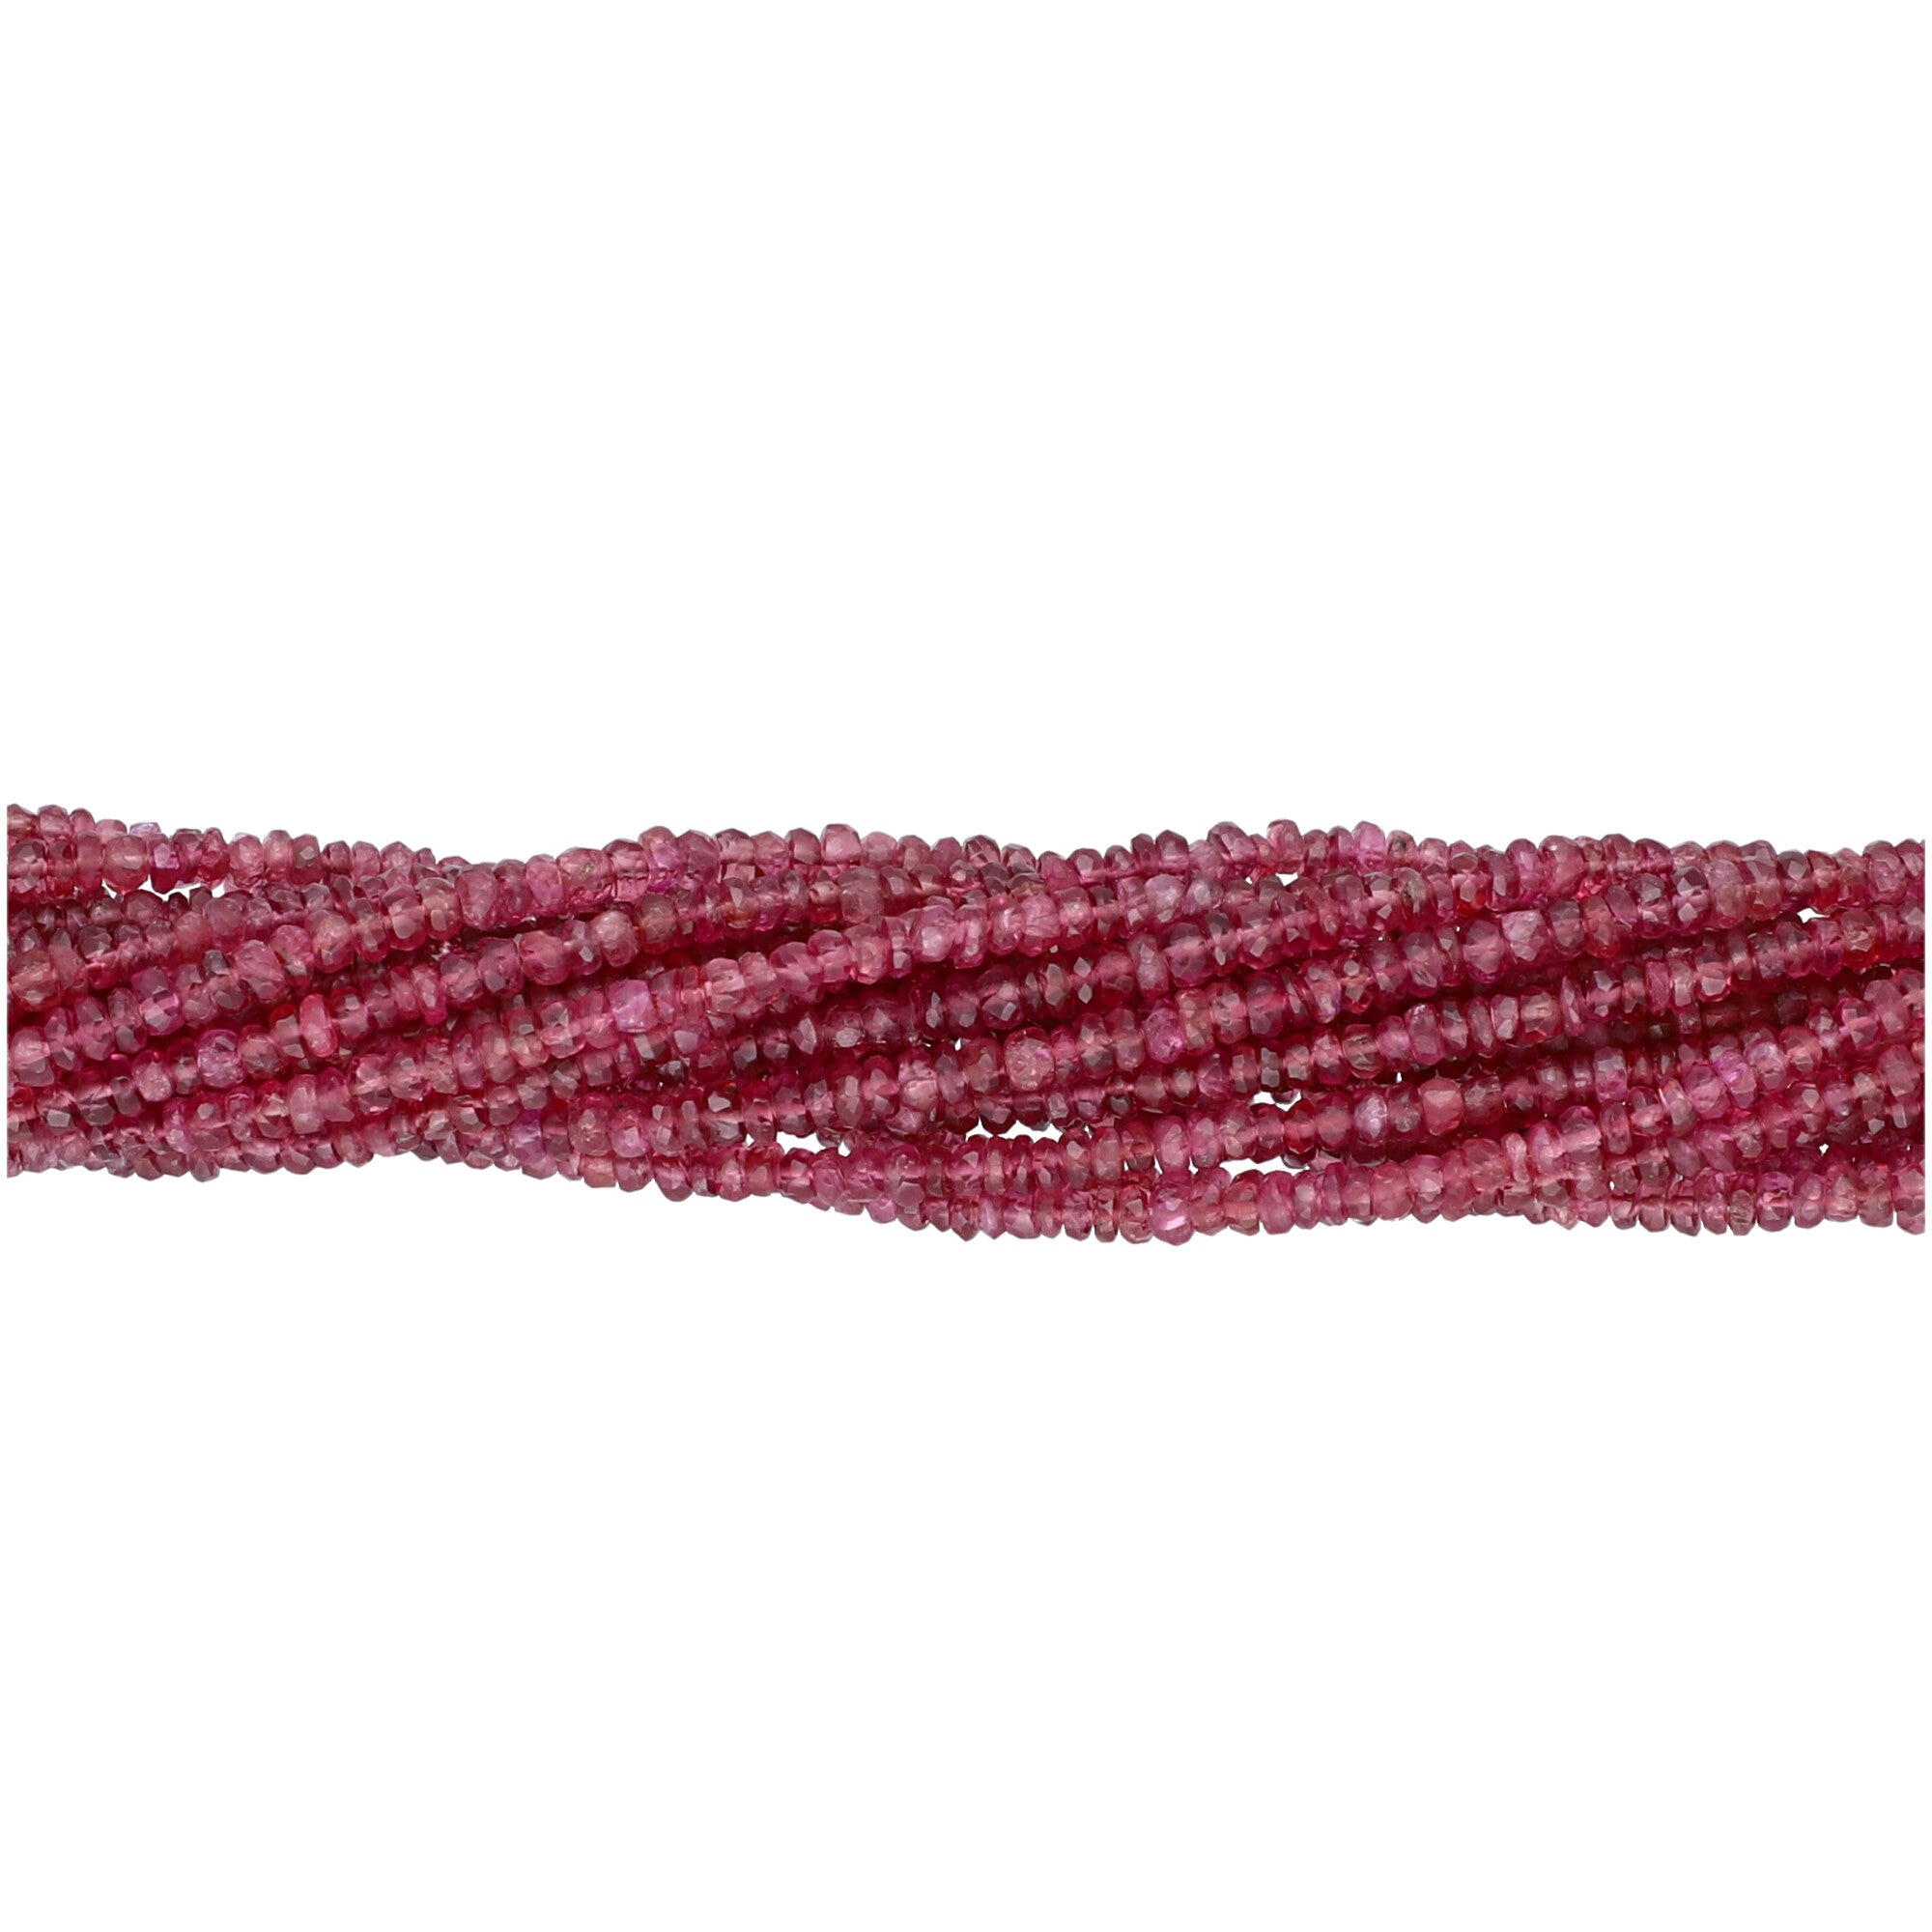 Red Spinel 2.5 MM Faceted Rondelle Shape Beads Strand